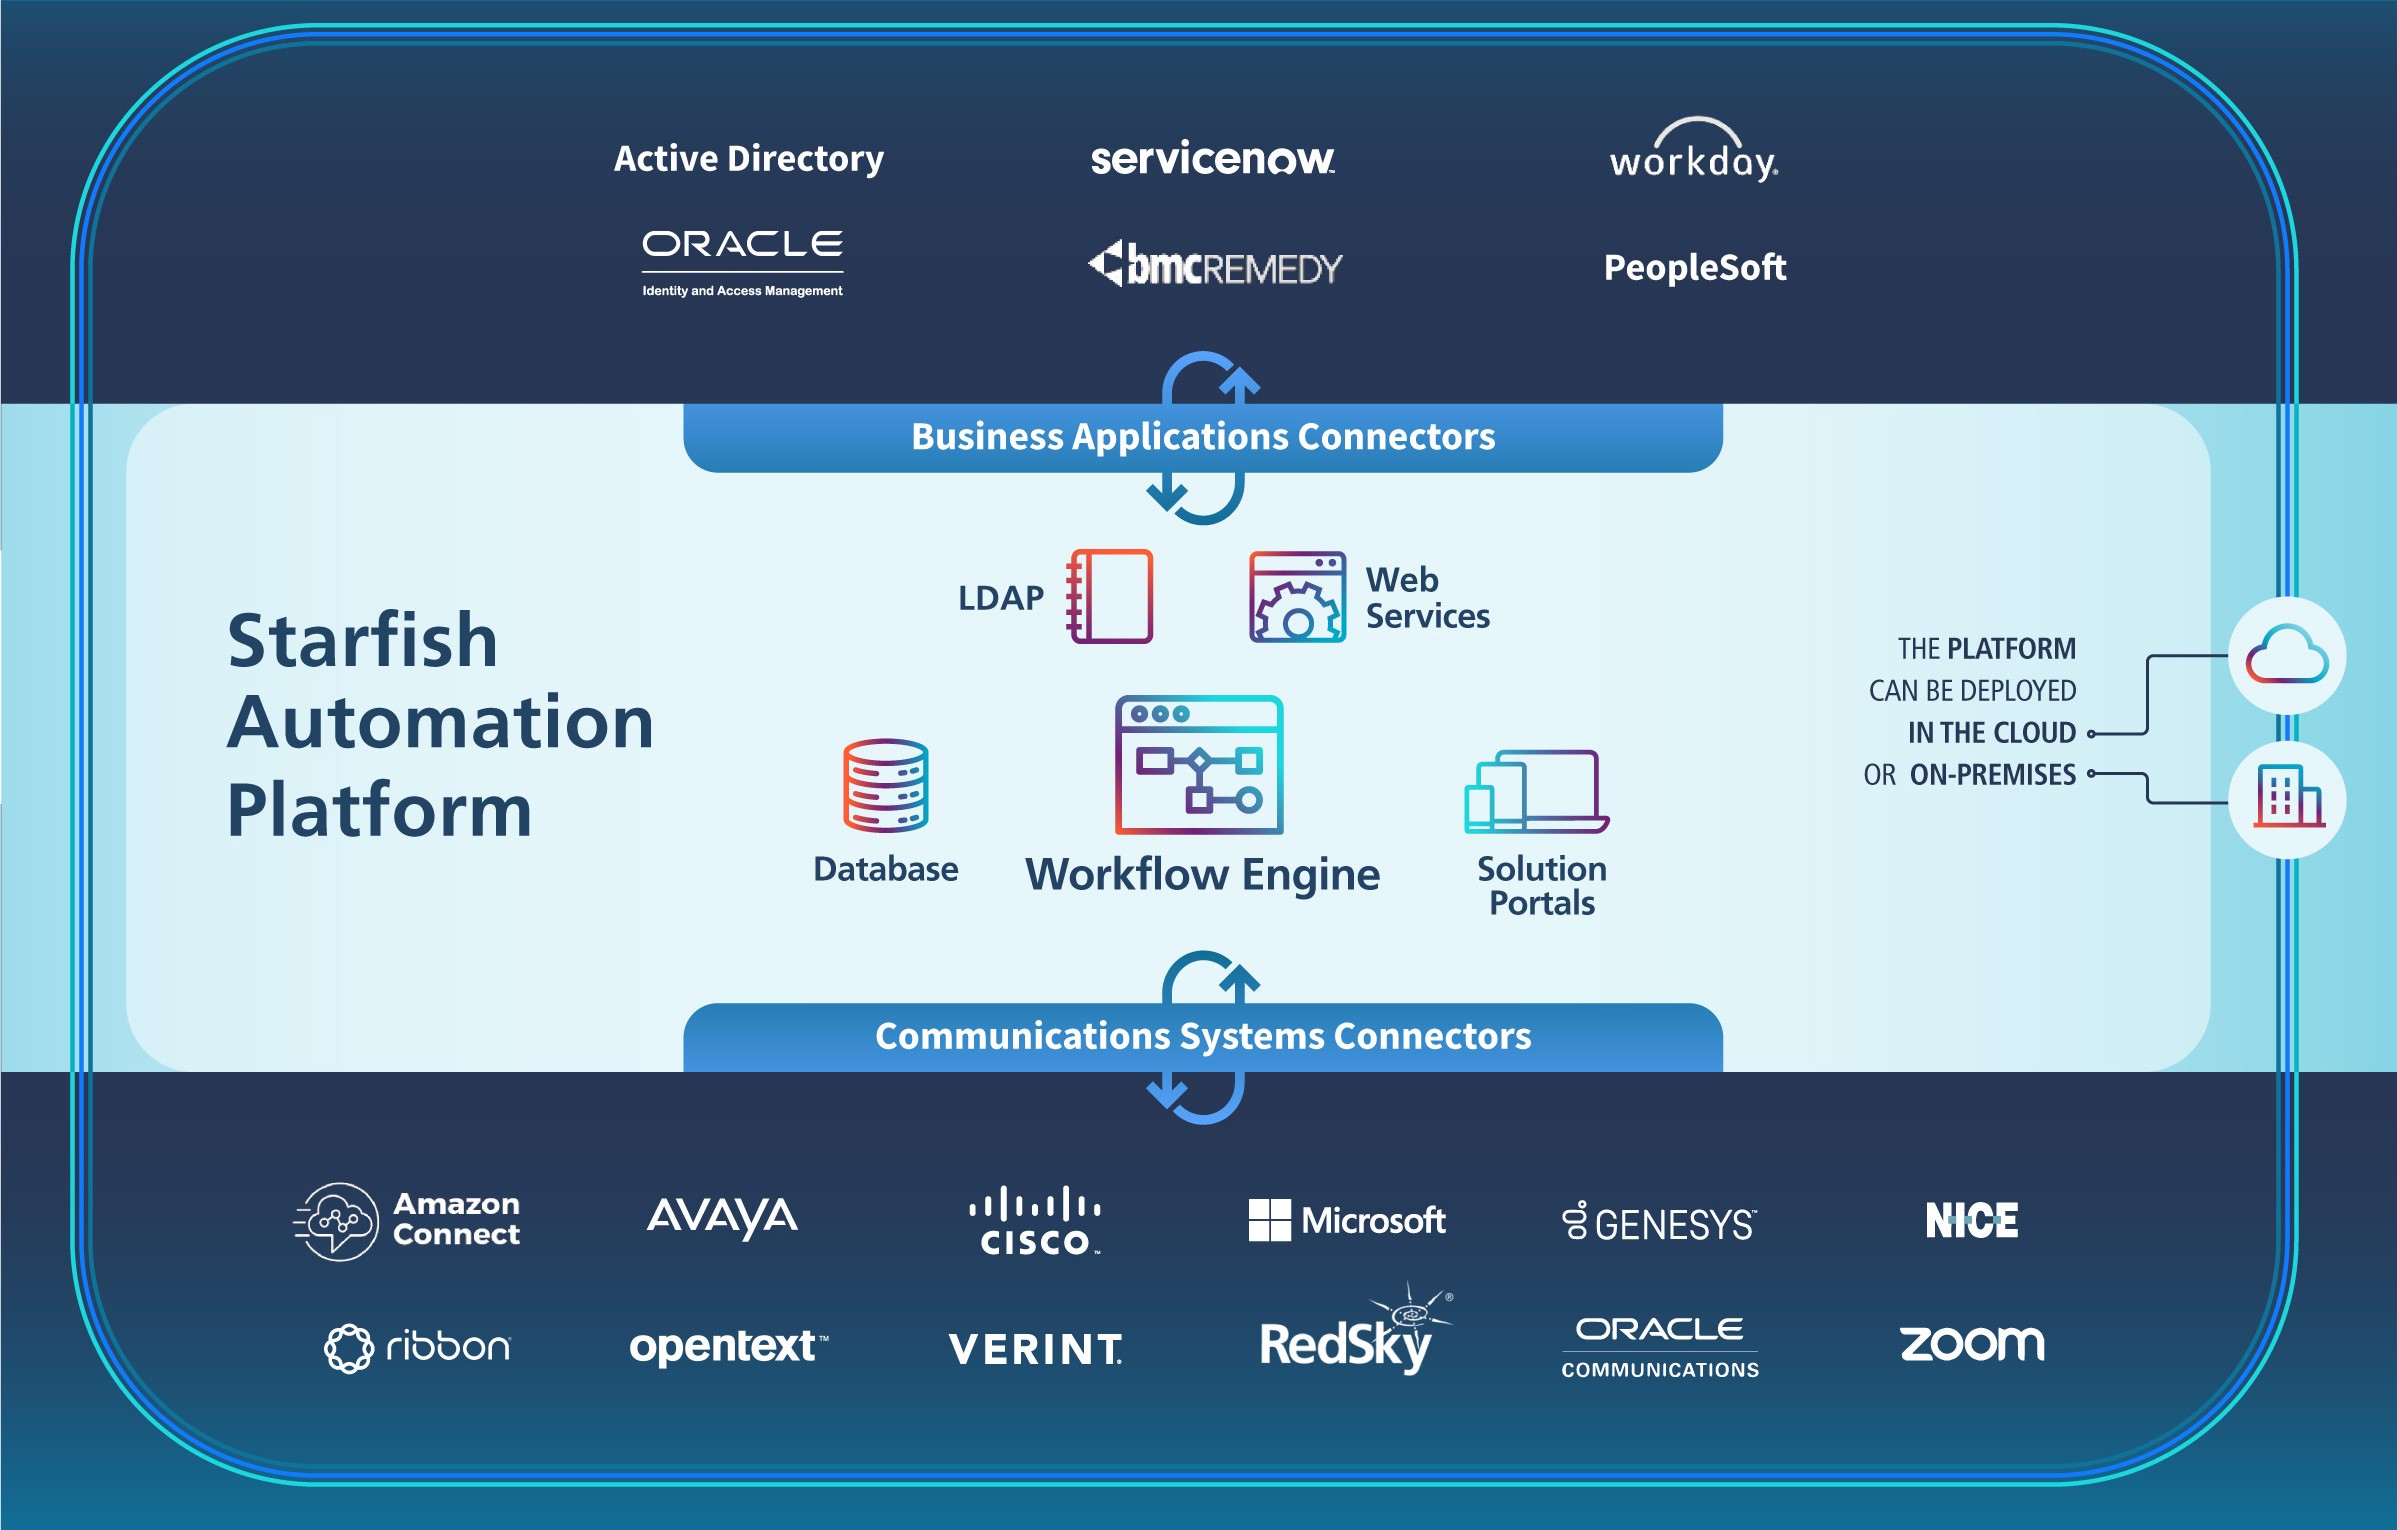 Components of the Starfish Automation platform including LDAP, web services, database, portals and workflow engine. Includes images of leading IT application and communication platform integrations